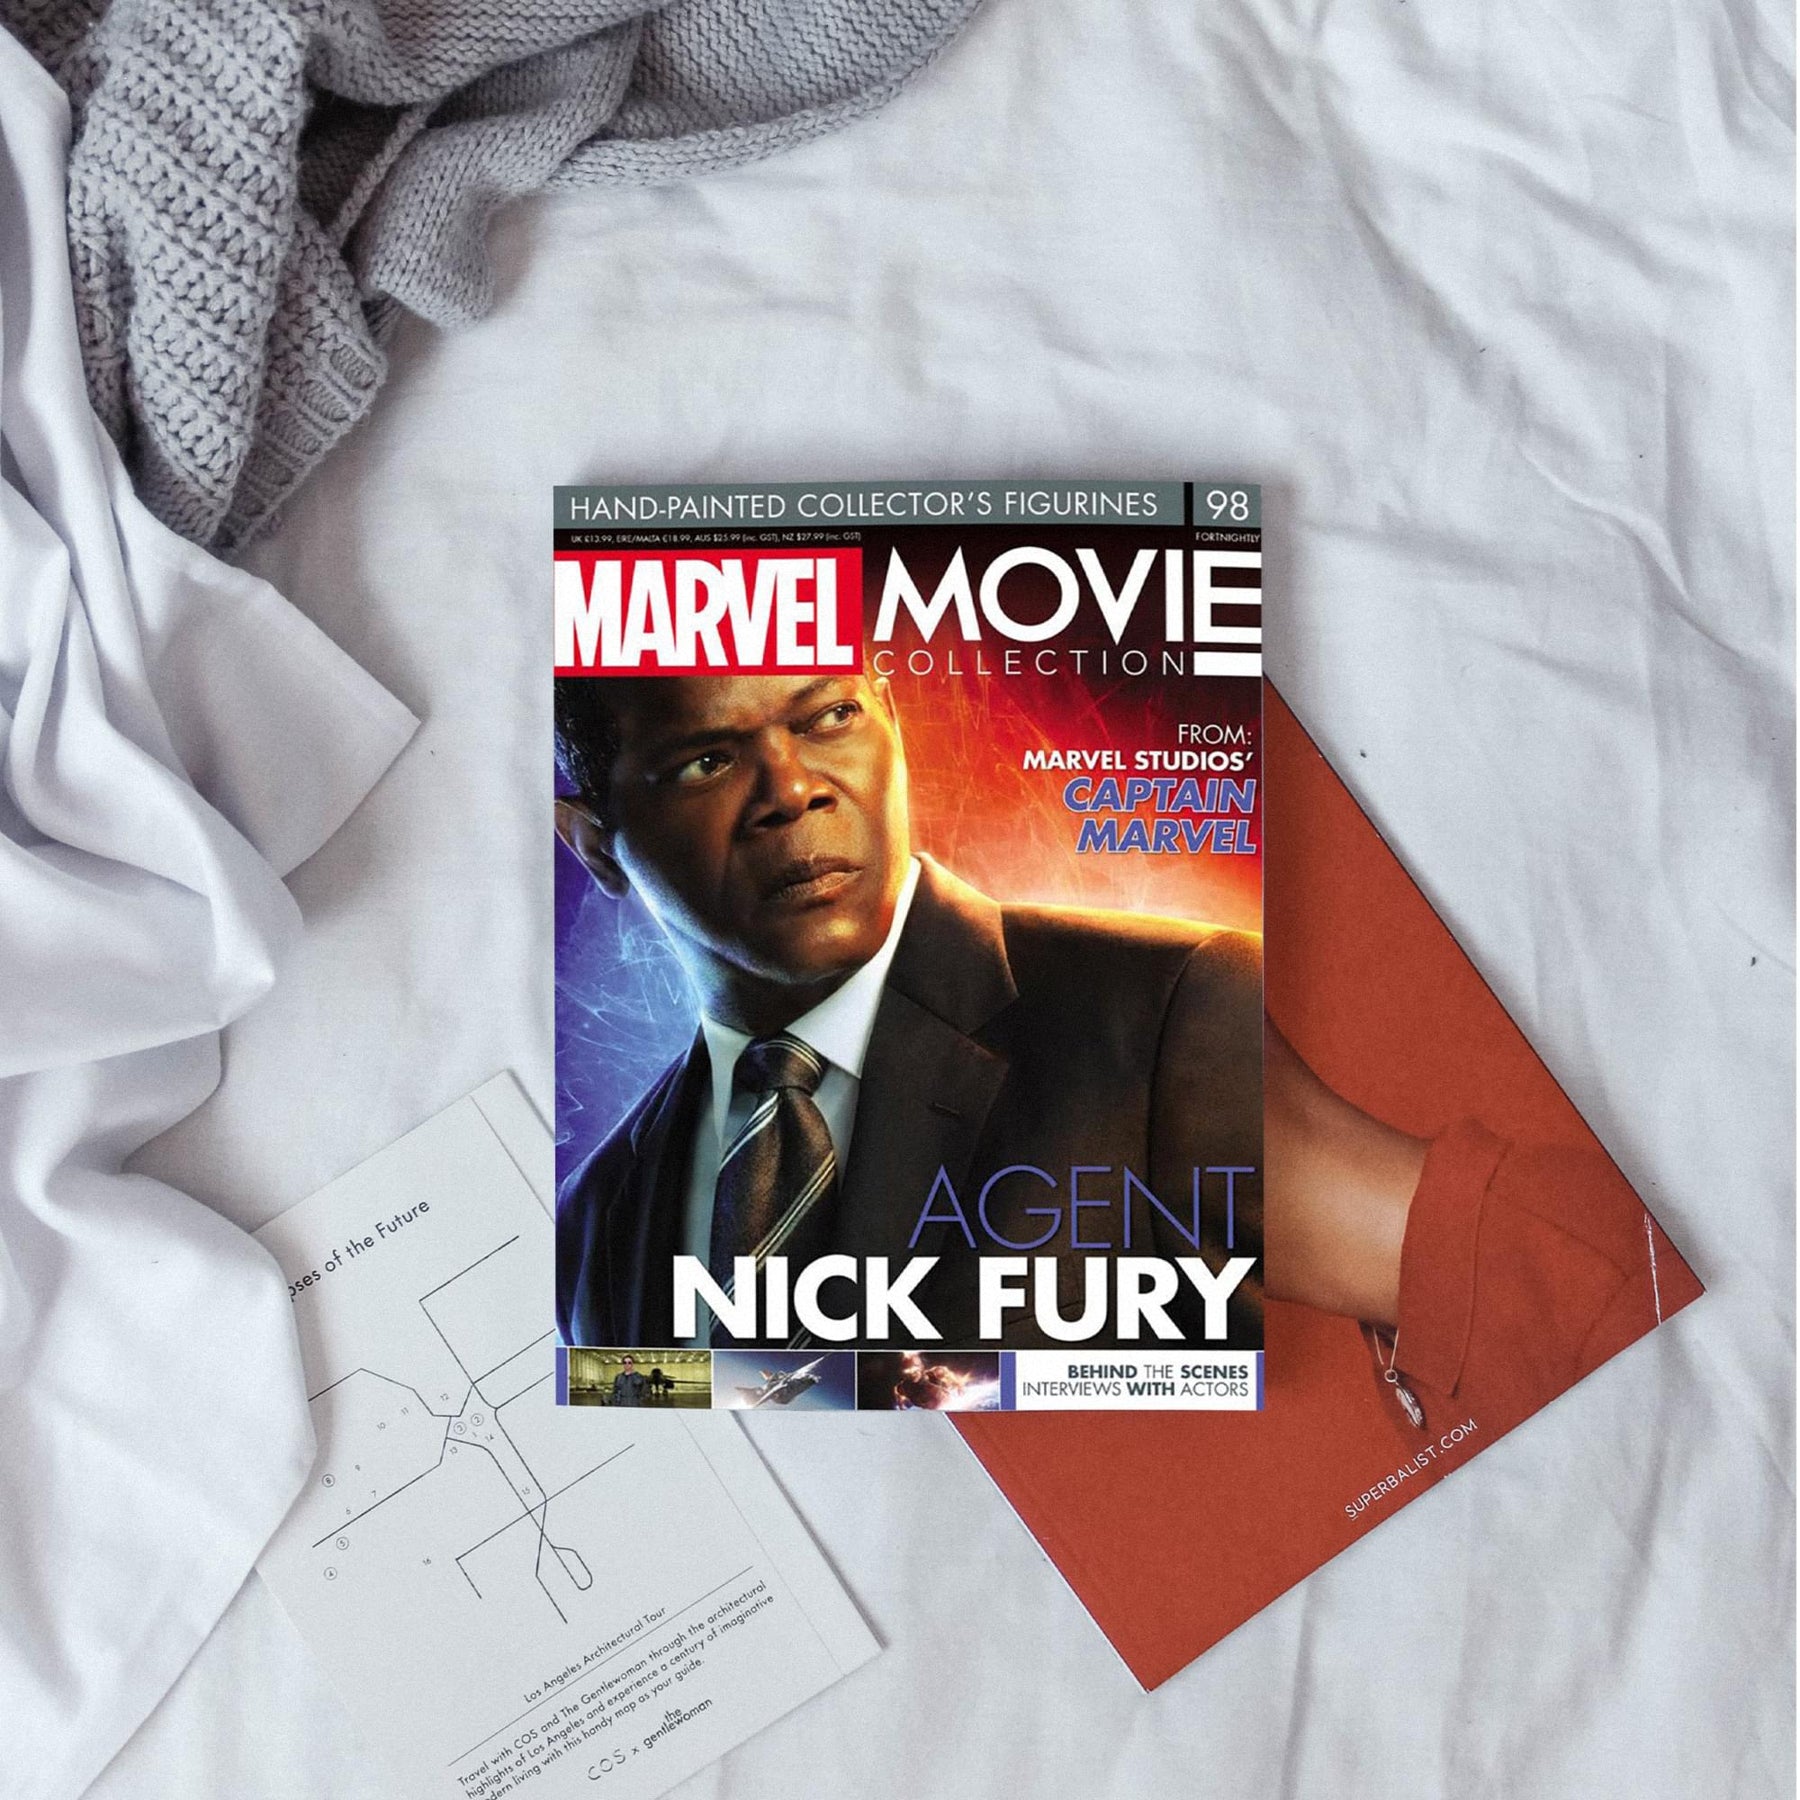 Marvel Movie Collection Magazine Issue #98 Agent Nick Fury